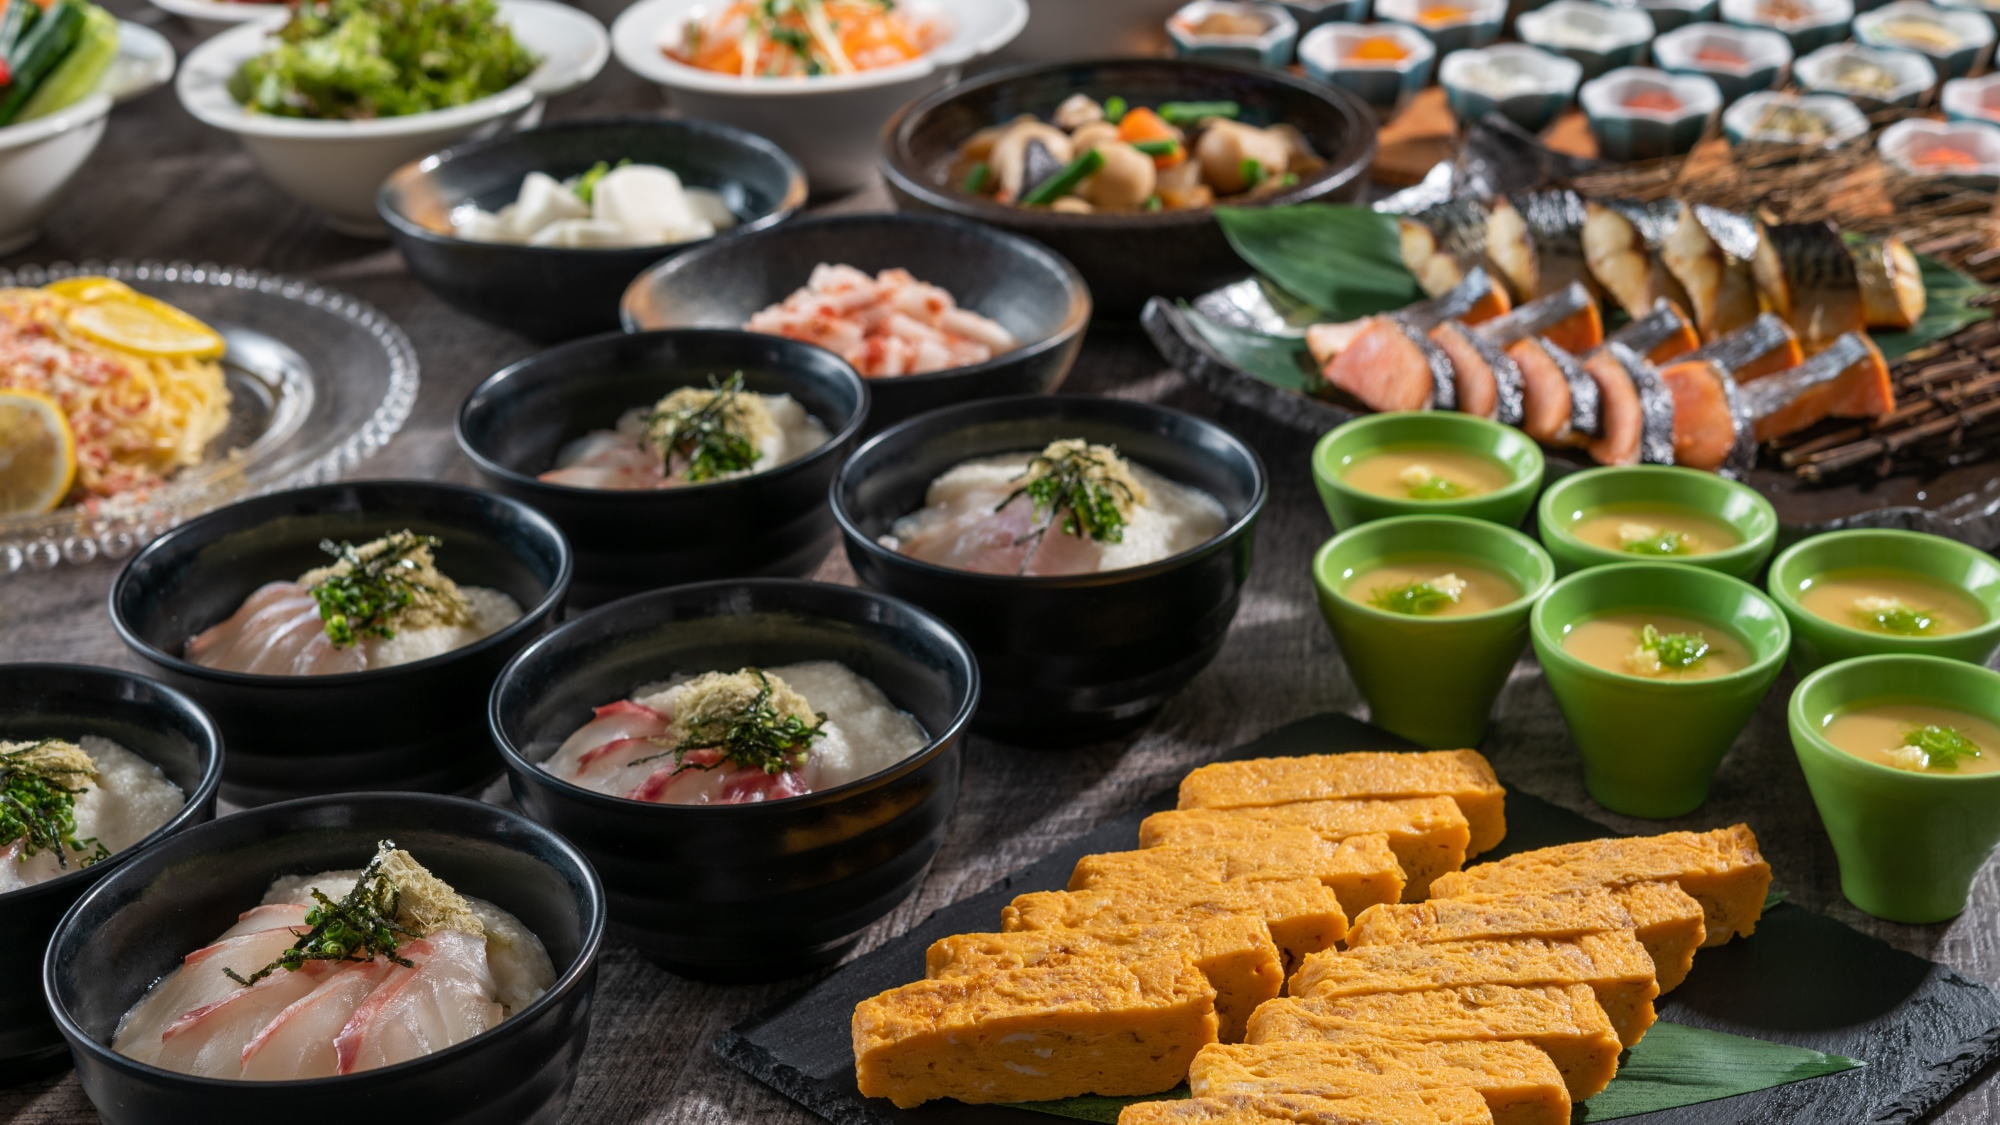 [Breakfast] Japanese, Western, and Chinese buffet with everything from local cuisine to standard menu items!